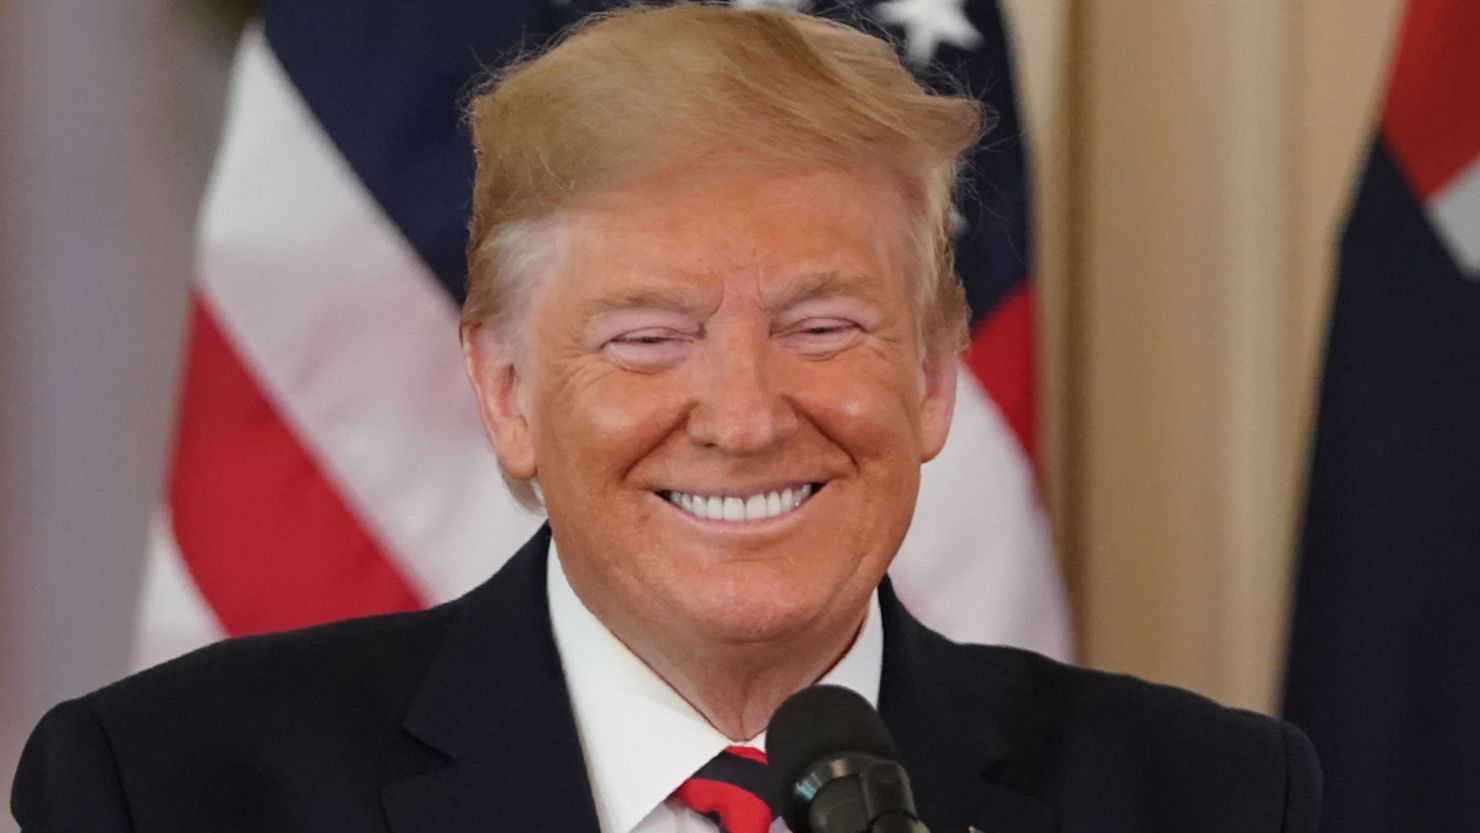 US President Donald Trump smiles during a press conference with Australian Prime Minister Scott Morrison in the East Room of the White House in Washington, DC, on September 20, 2019.